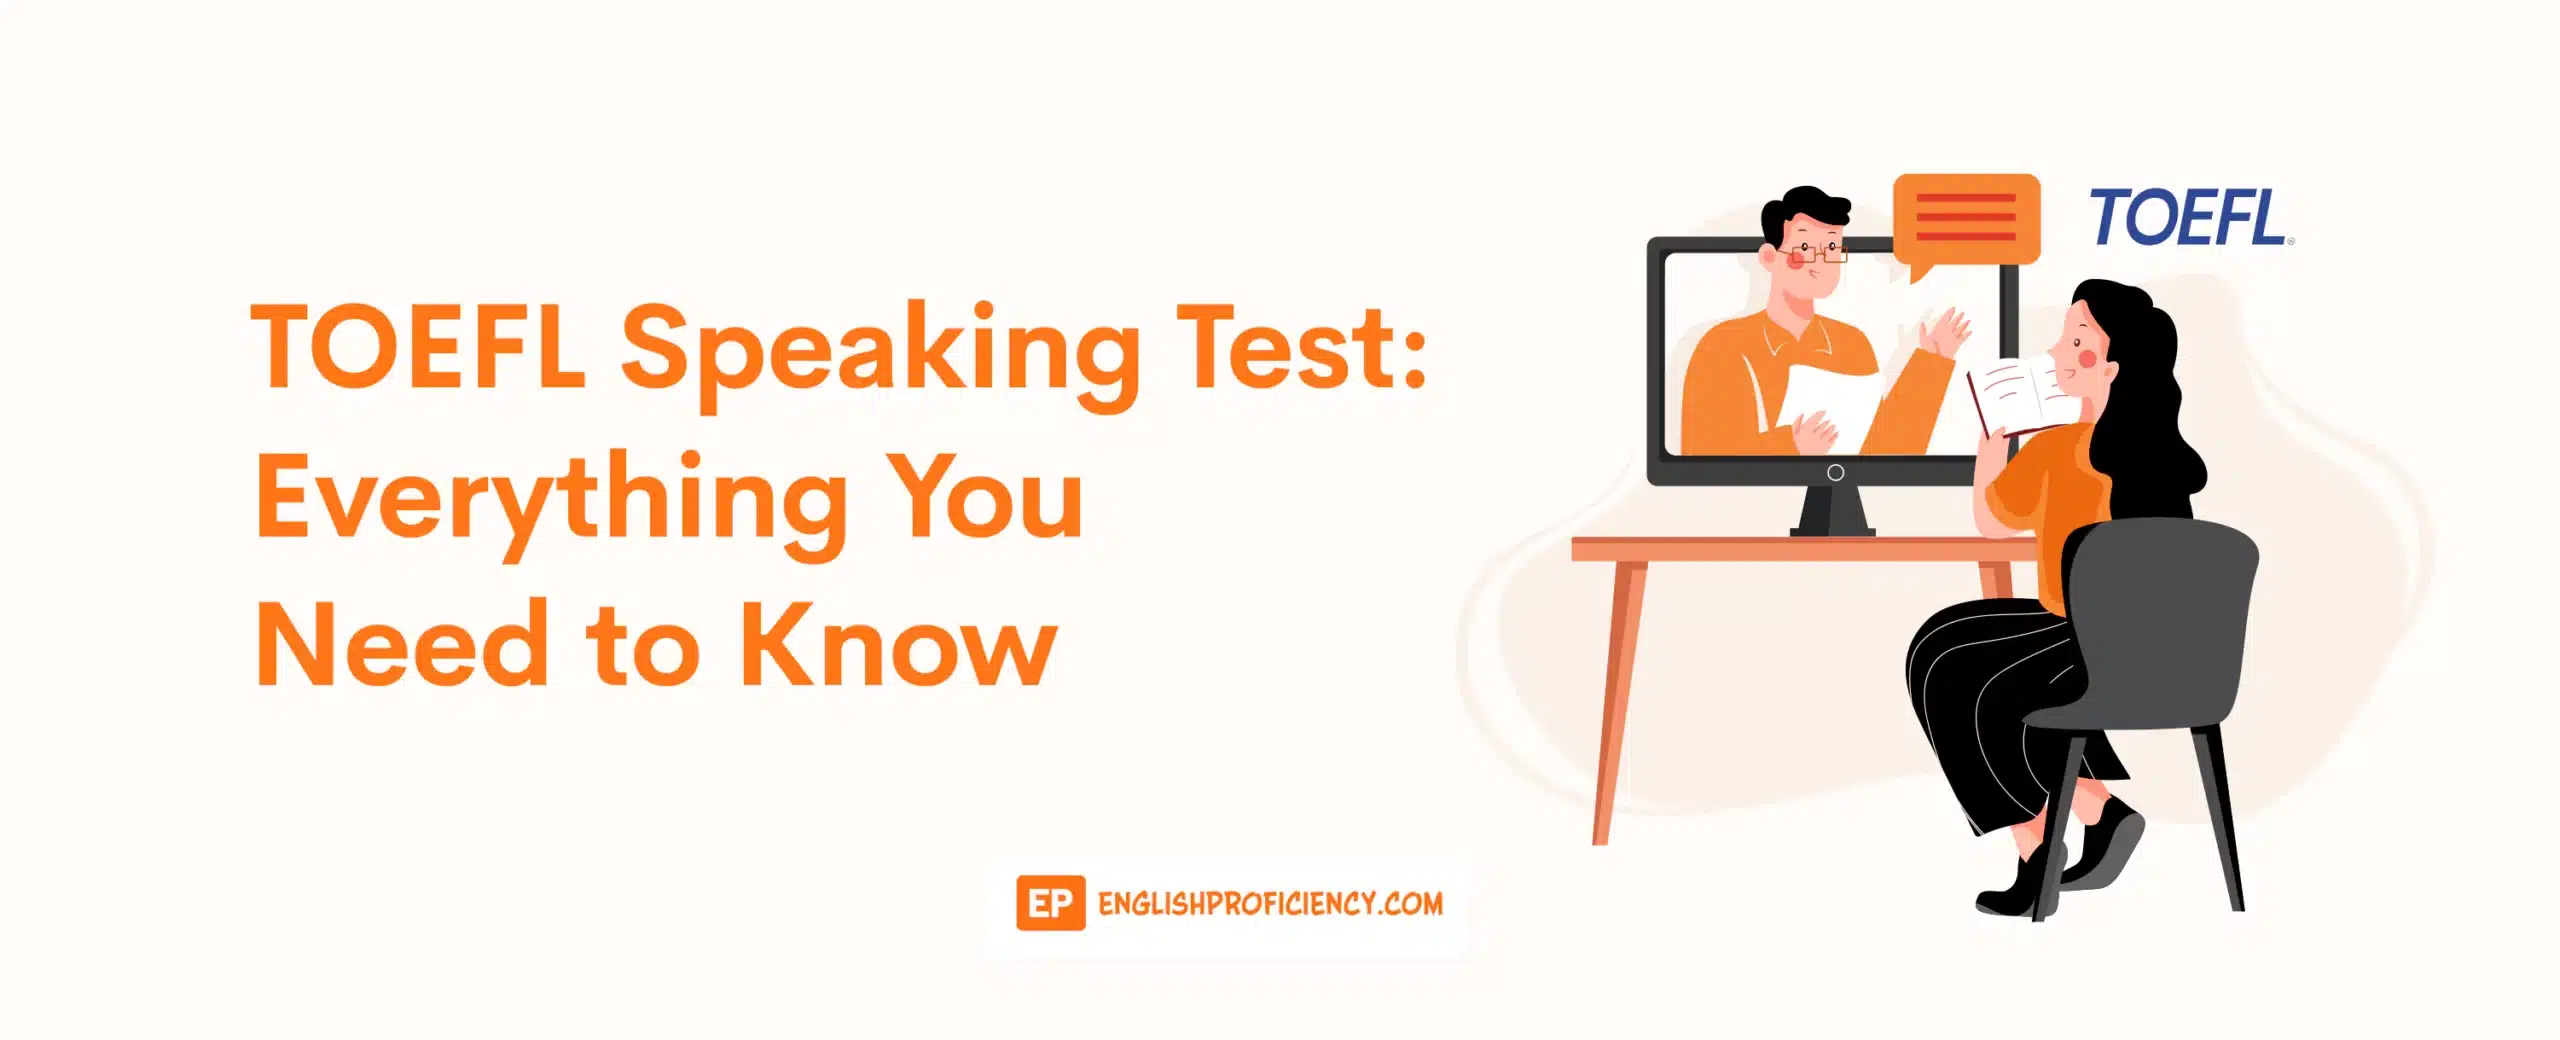 TOEFL Speaking Test Everything You Need to Know